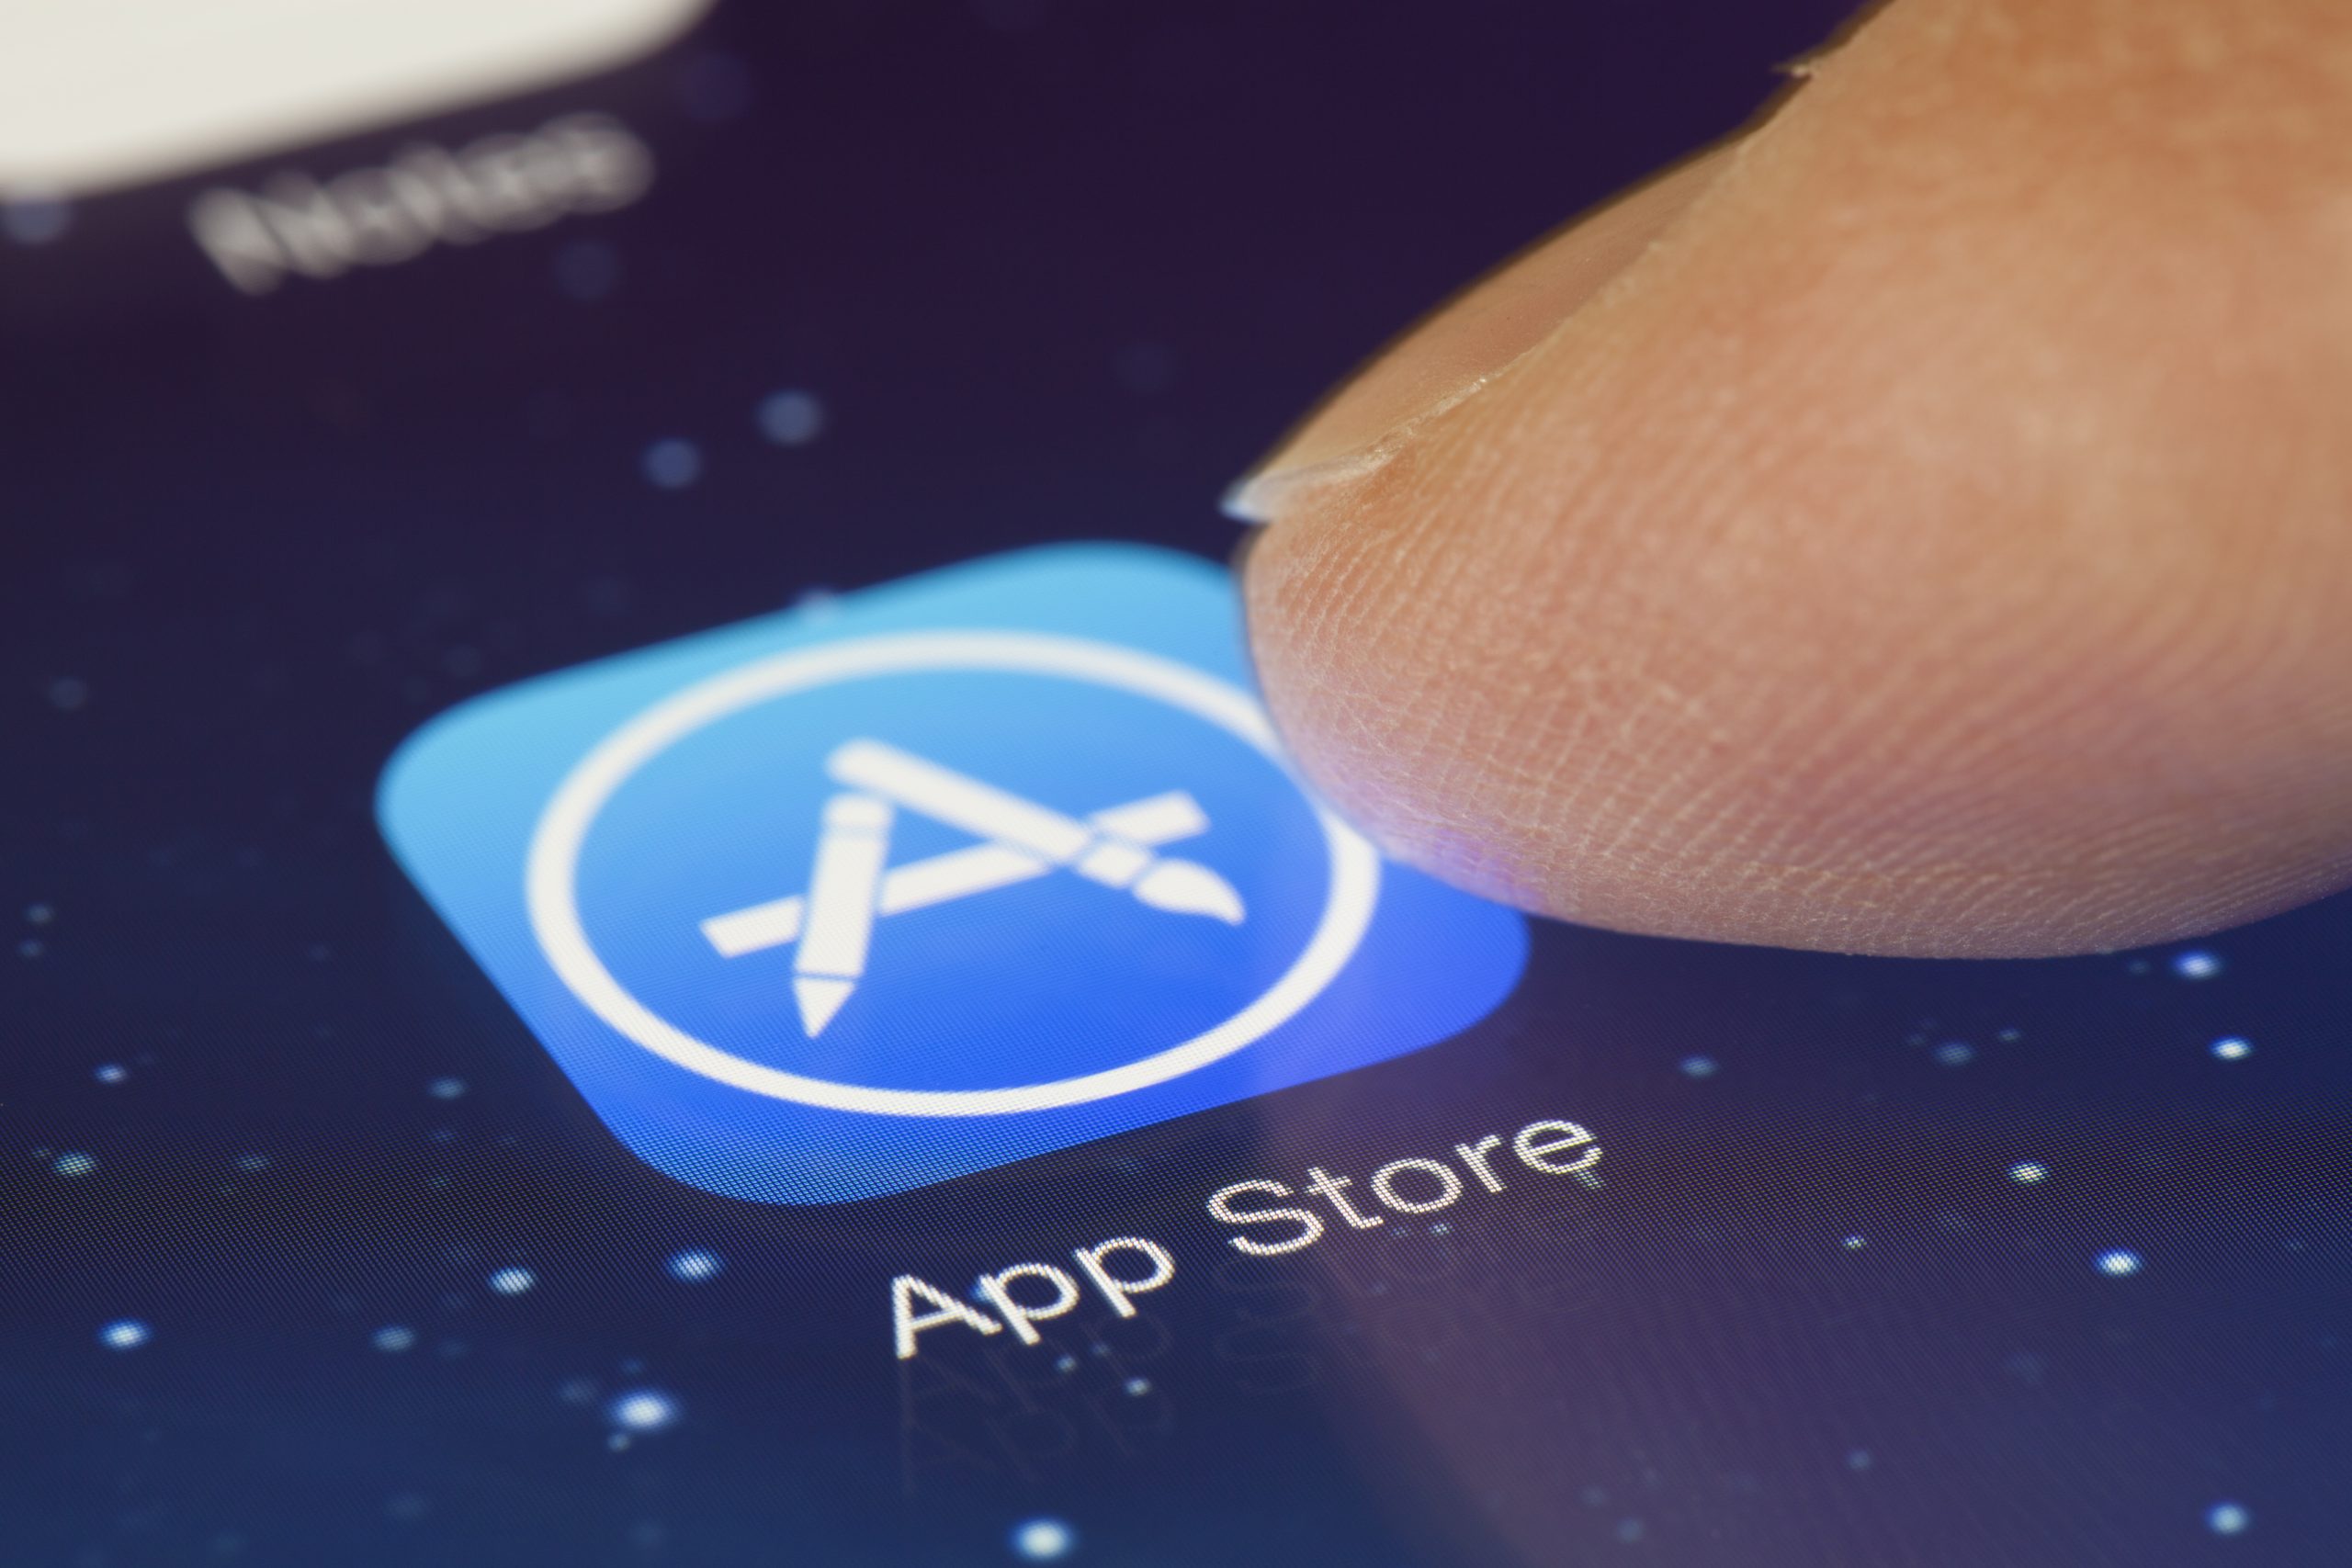 Report suggests two percent of the top 1,000 App Store titles were scams